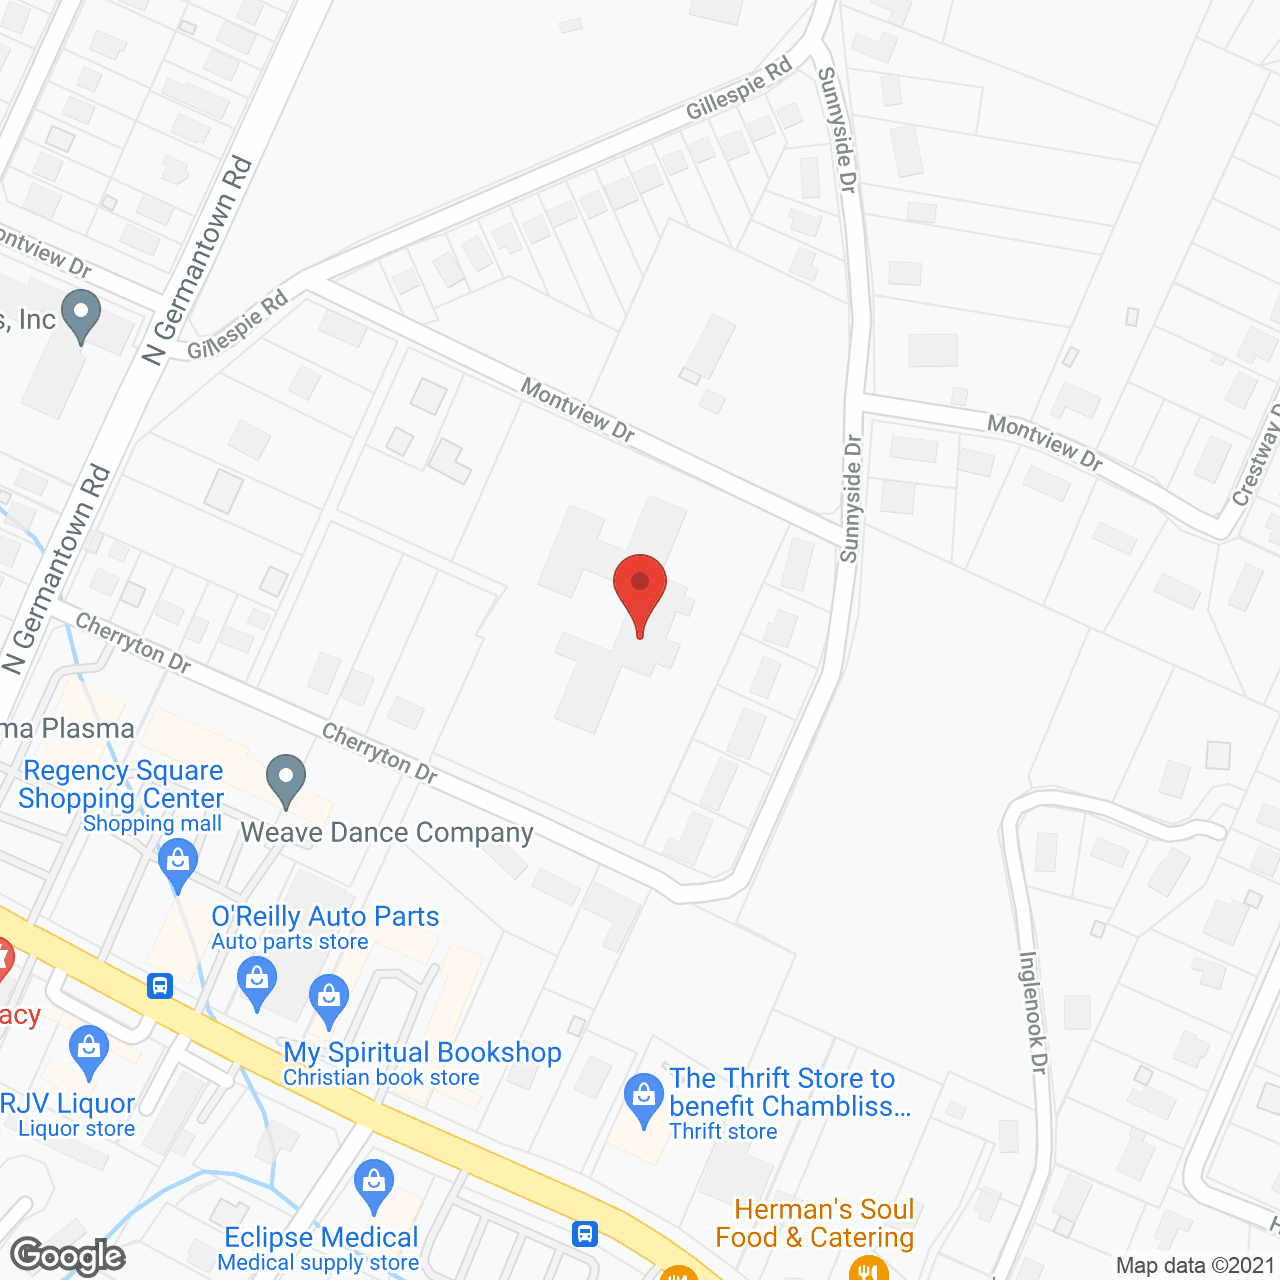 Caldsted Foundation Inc. in google map